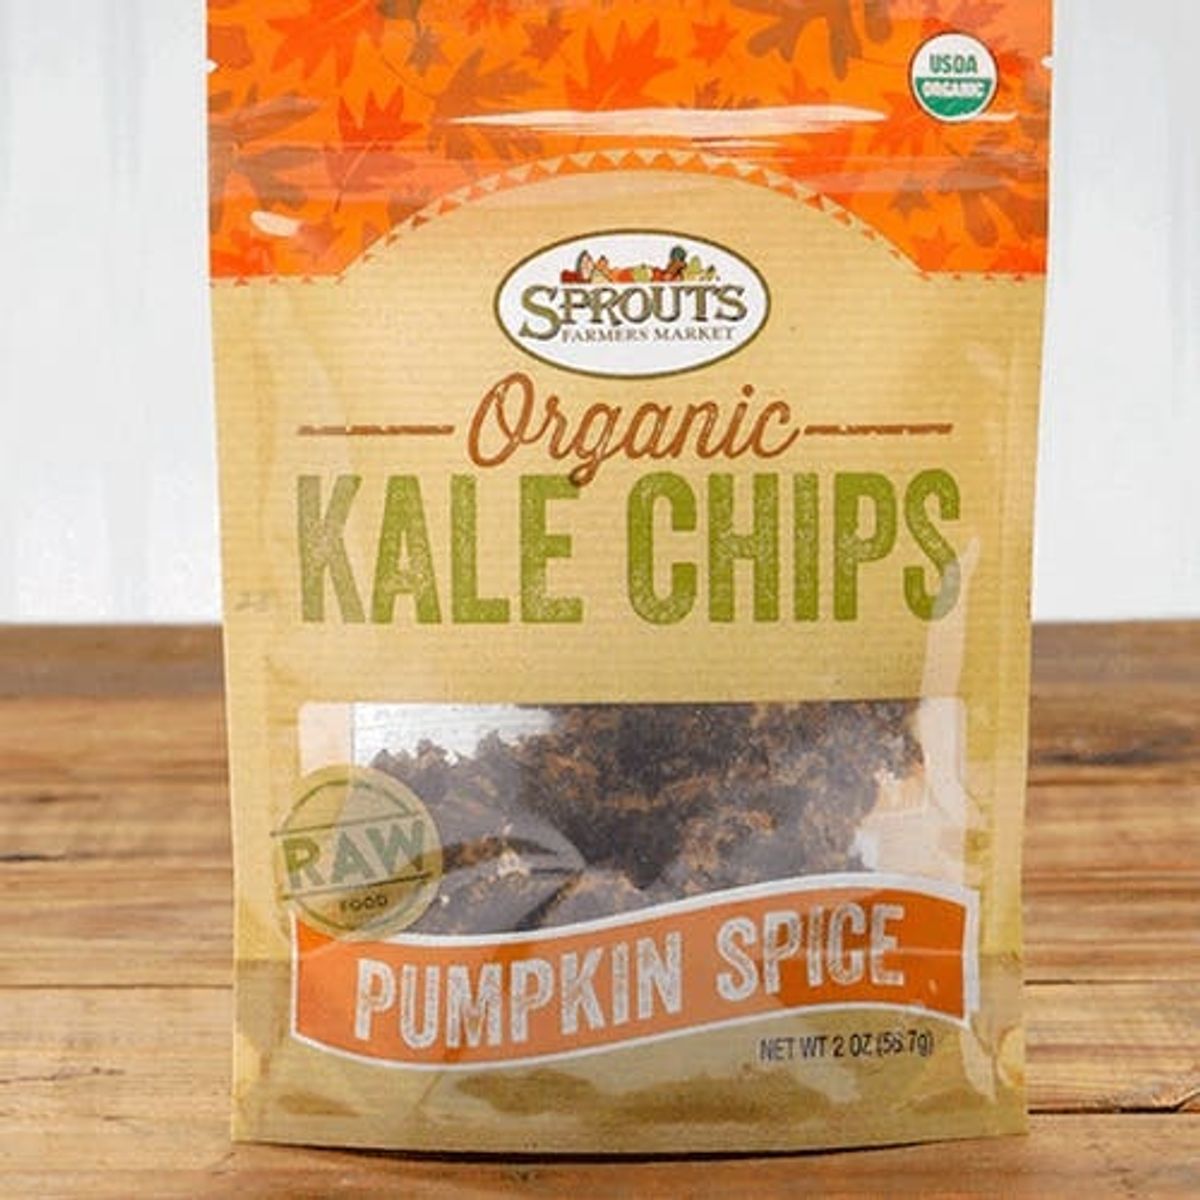 The Top 10 Weirdest Pumpkin Spice-Flavored Foods That You’ll Never Want (Probably)